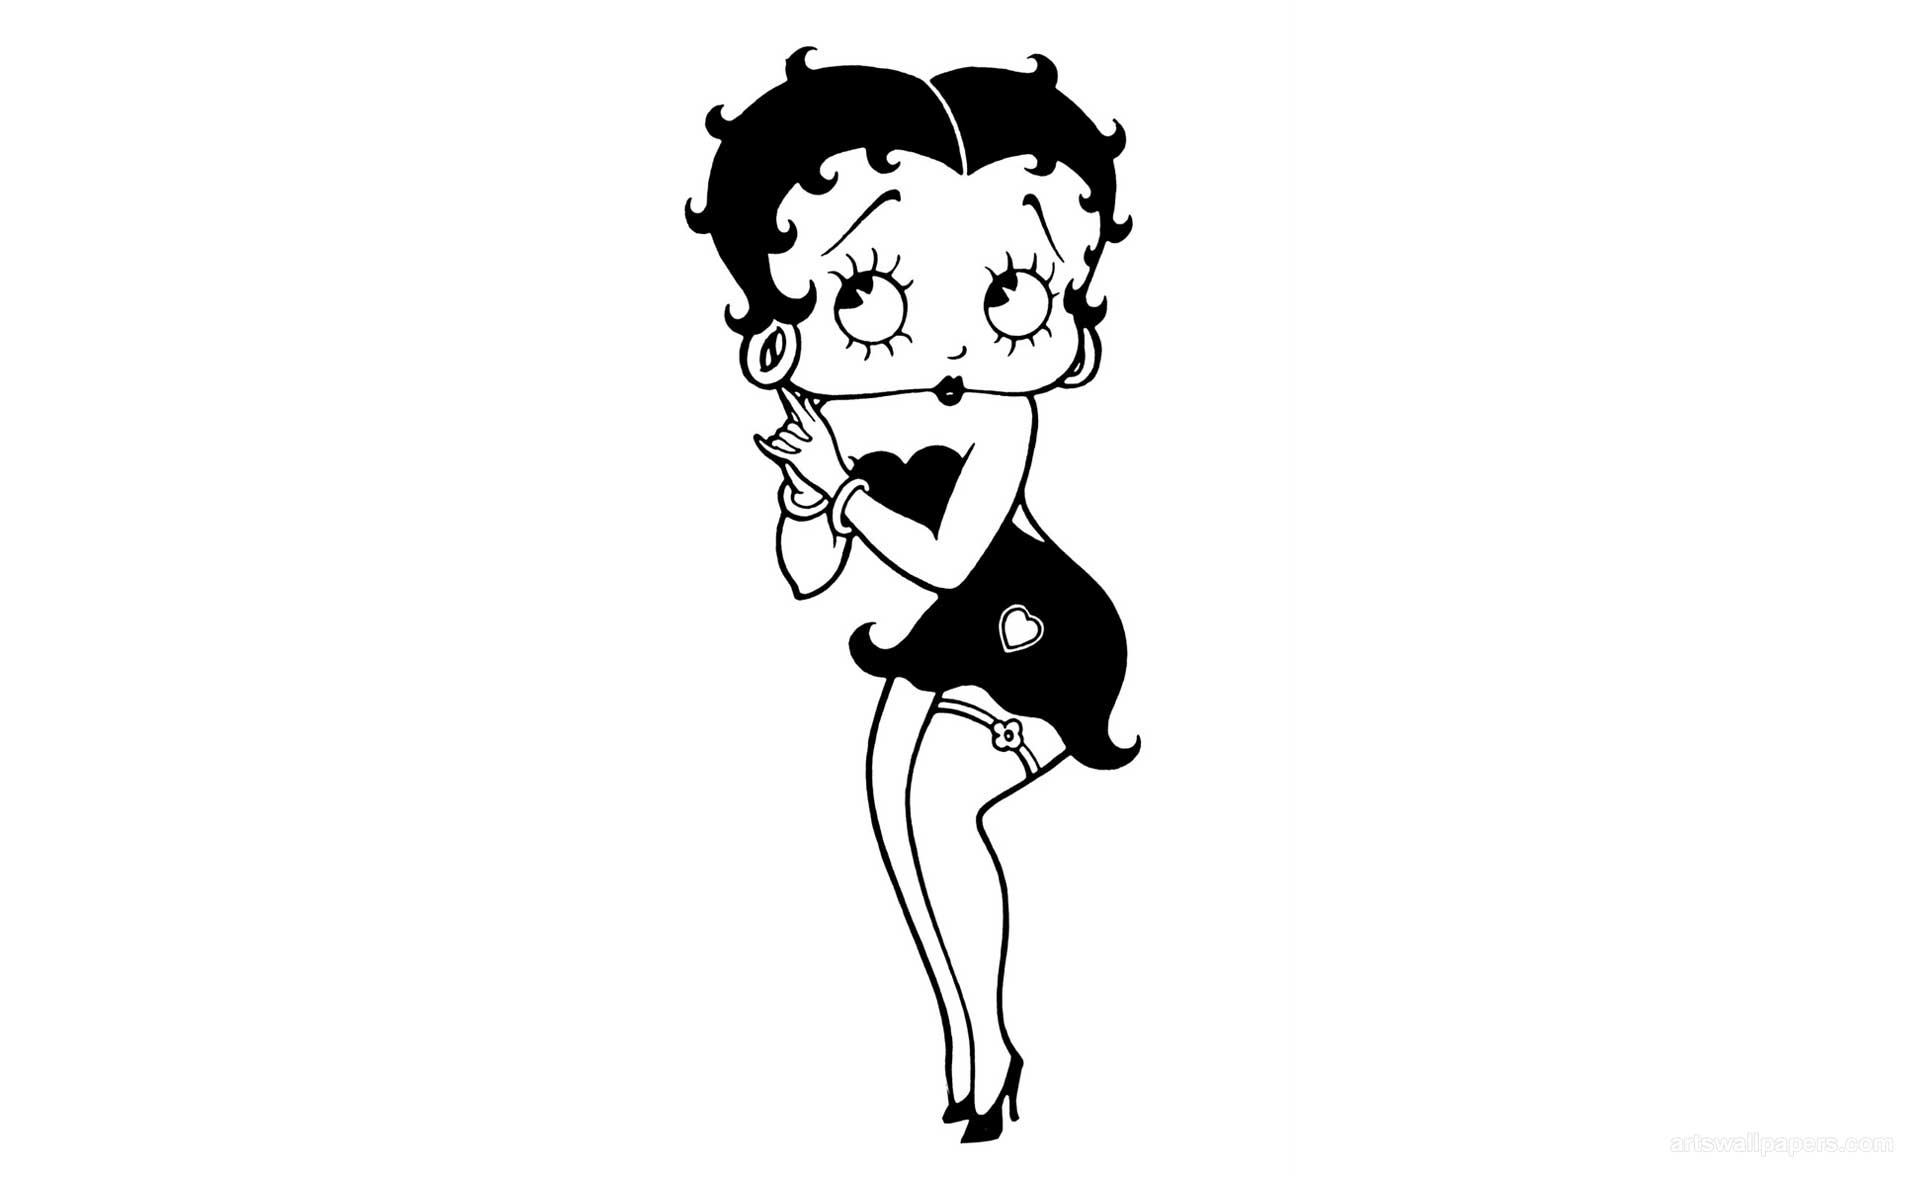 Free Download Betty Boop Wallpapers 02 19x10 For Your Desktop Mobile Tablet Explore 73 Betty Boop Backgrounds Black Betty Boop Wallpaper Betty Boop Pink Wallpaper Free Betty Boop Desktop Wallpaper